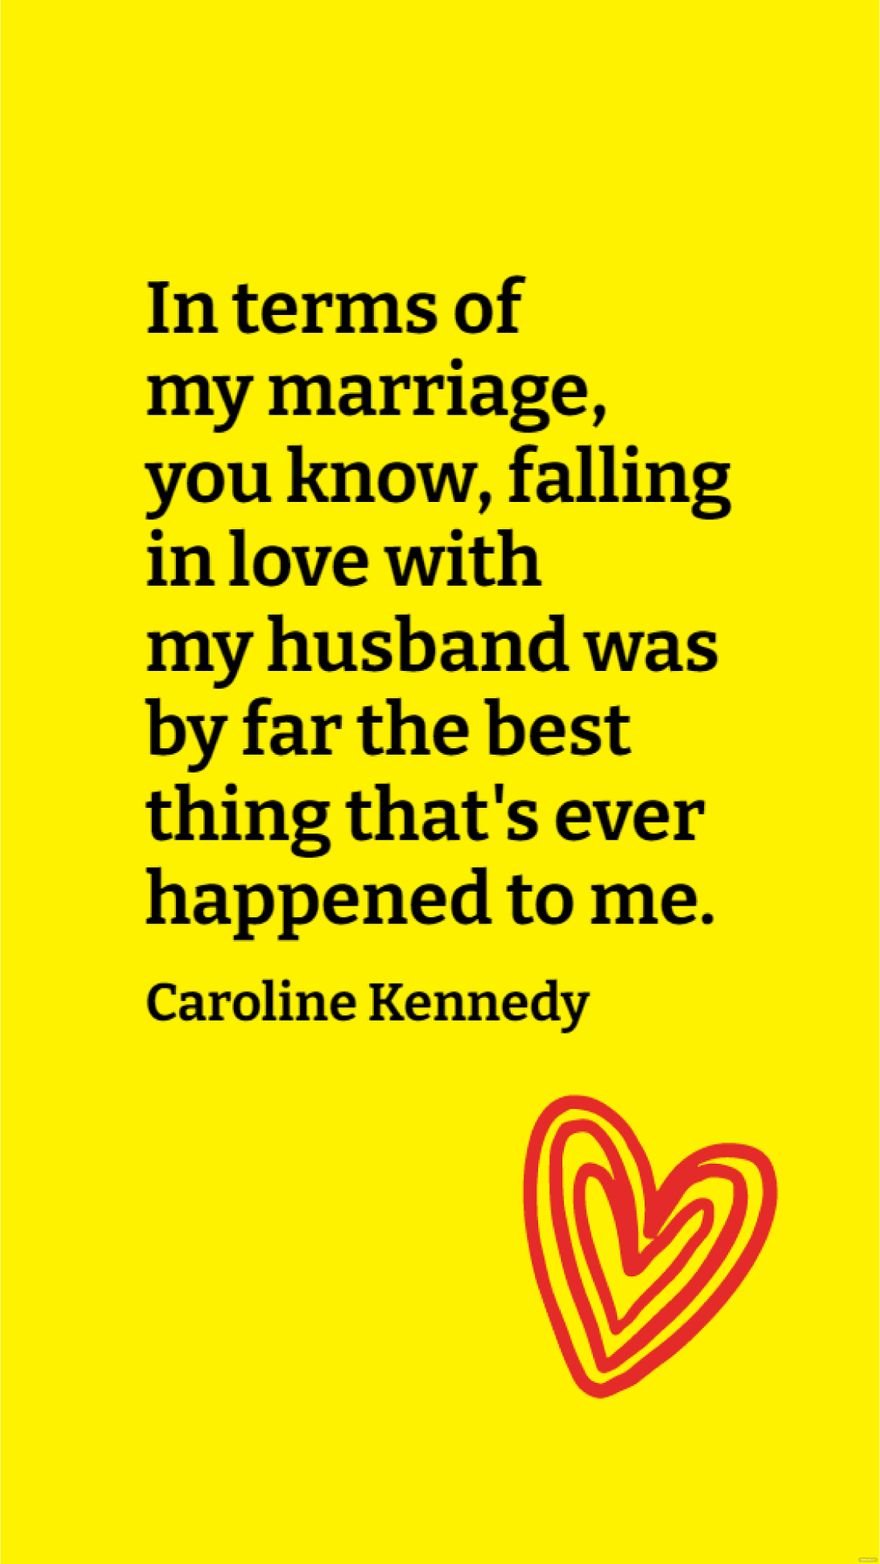 Caroline Kennedy - In terms of my marriage, you know, falling in love with my husband was by far the best thing that's ever happened to me.